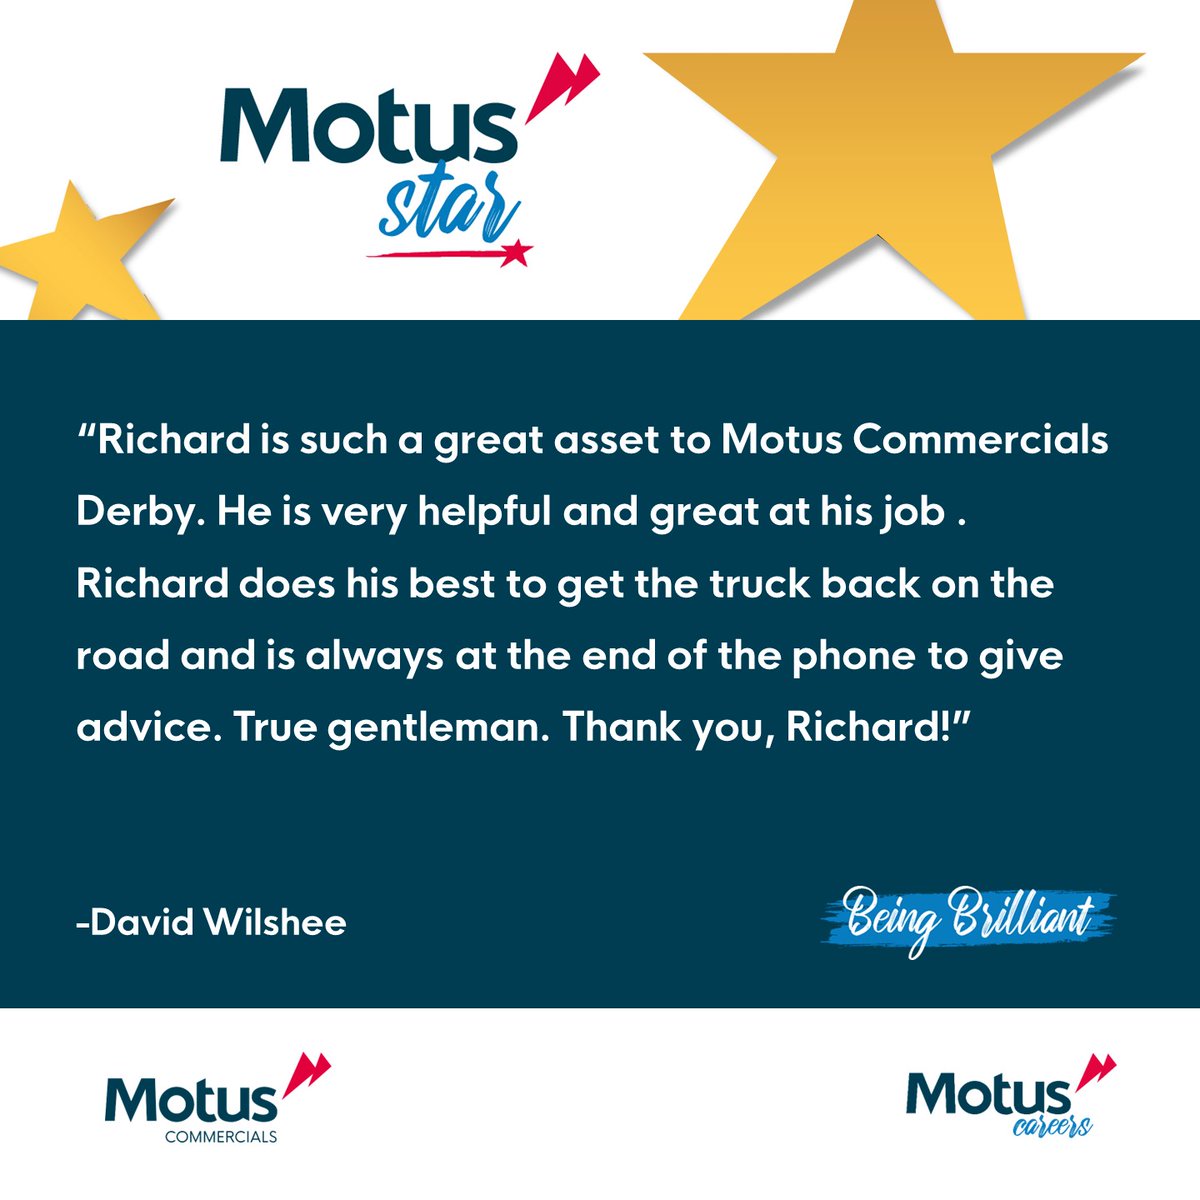 You're a STAR! ⭐ Congratulations to Richard Wright, from Motus Commercials Derby, for this fantastic Motus Star nomination! We love seeing our colleagues get the recognition they deserve from our customers! 🤩 #WinningWednesday #MotusStar #Proud #MotusPeople #MotusCommercials